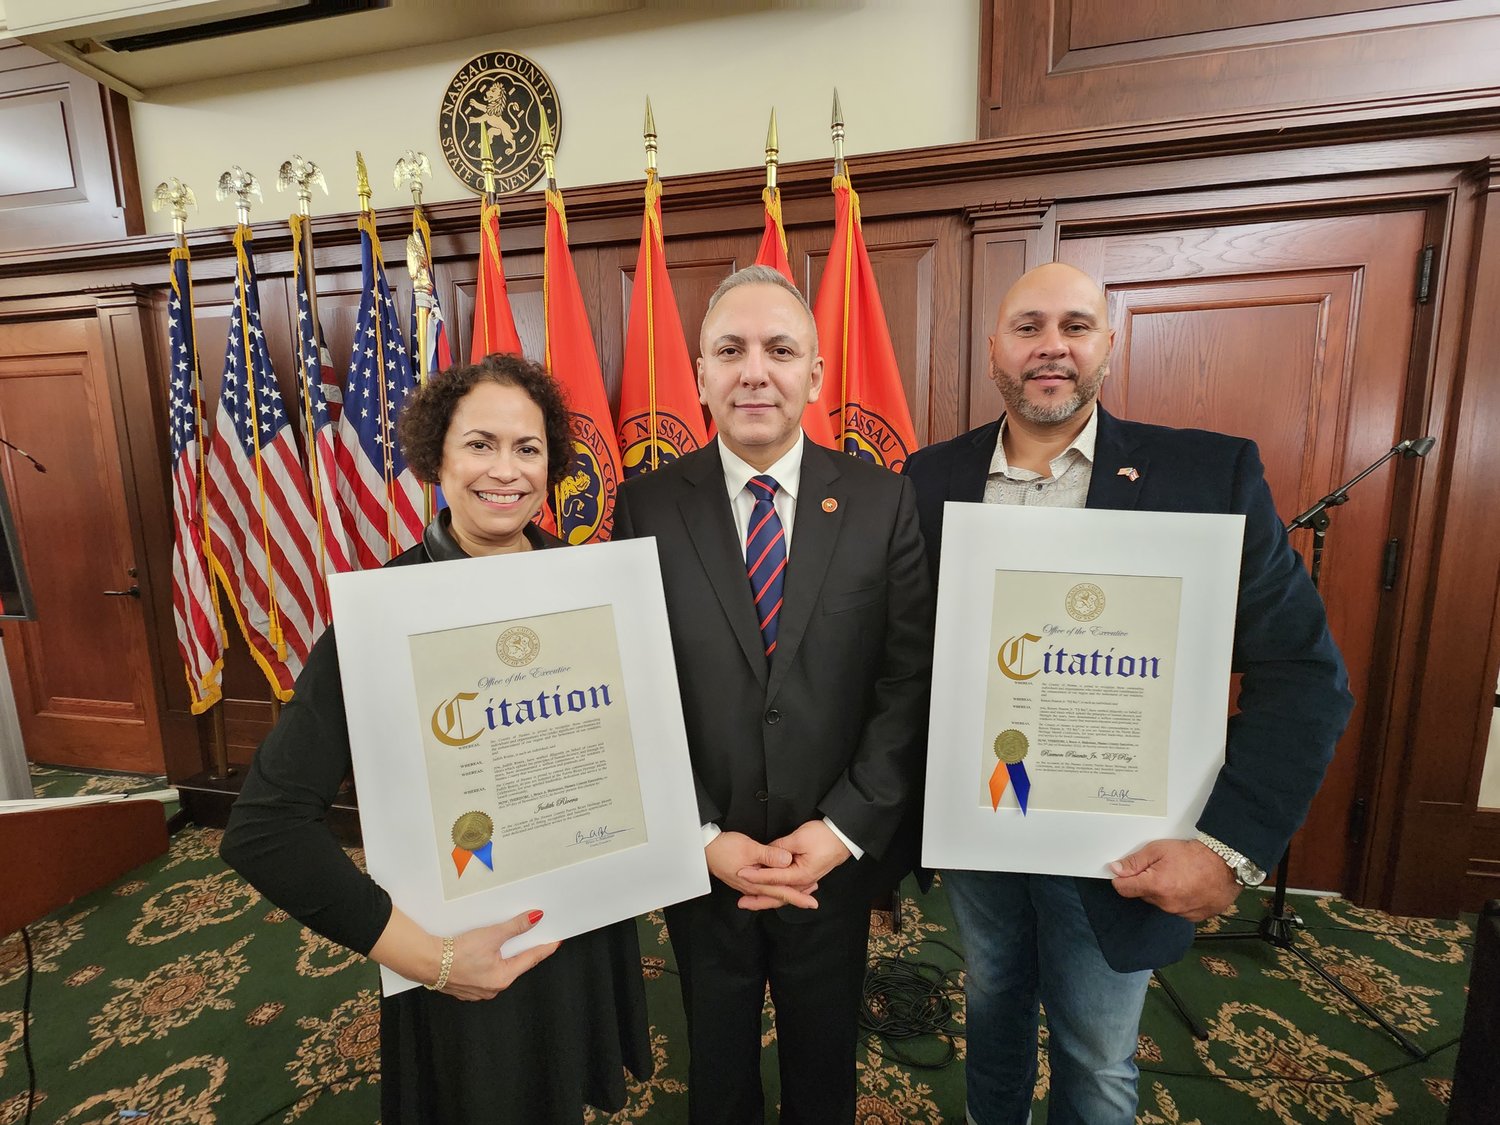 Judith Rivera and Ramon Pesentae Jr. received recognition for their community service in Glen Cove. With them was Herbert Flores, who presented Rivera and Pesentae with their citations.